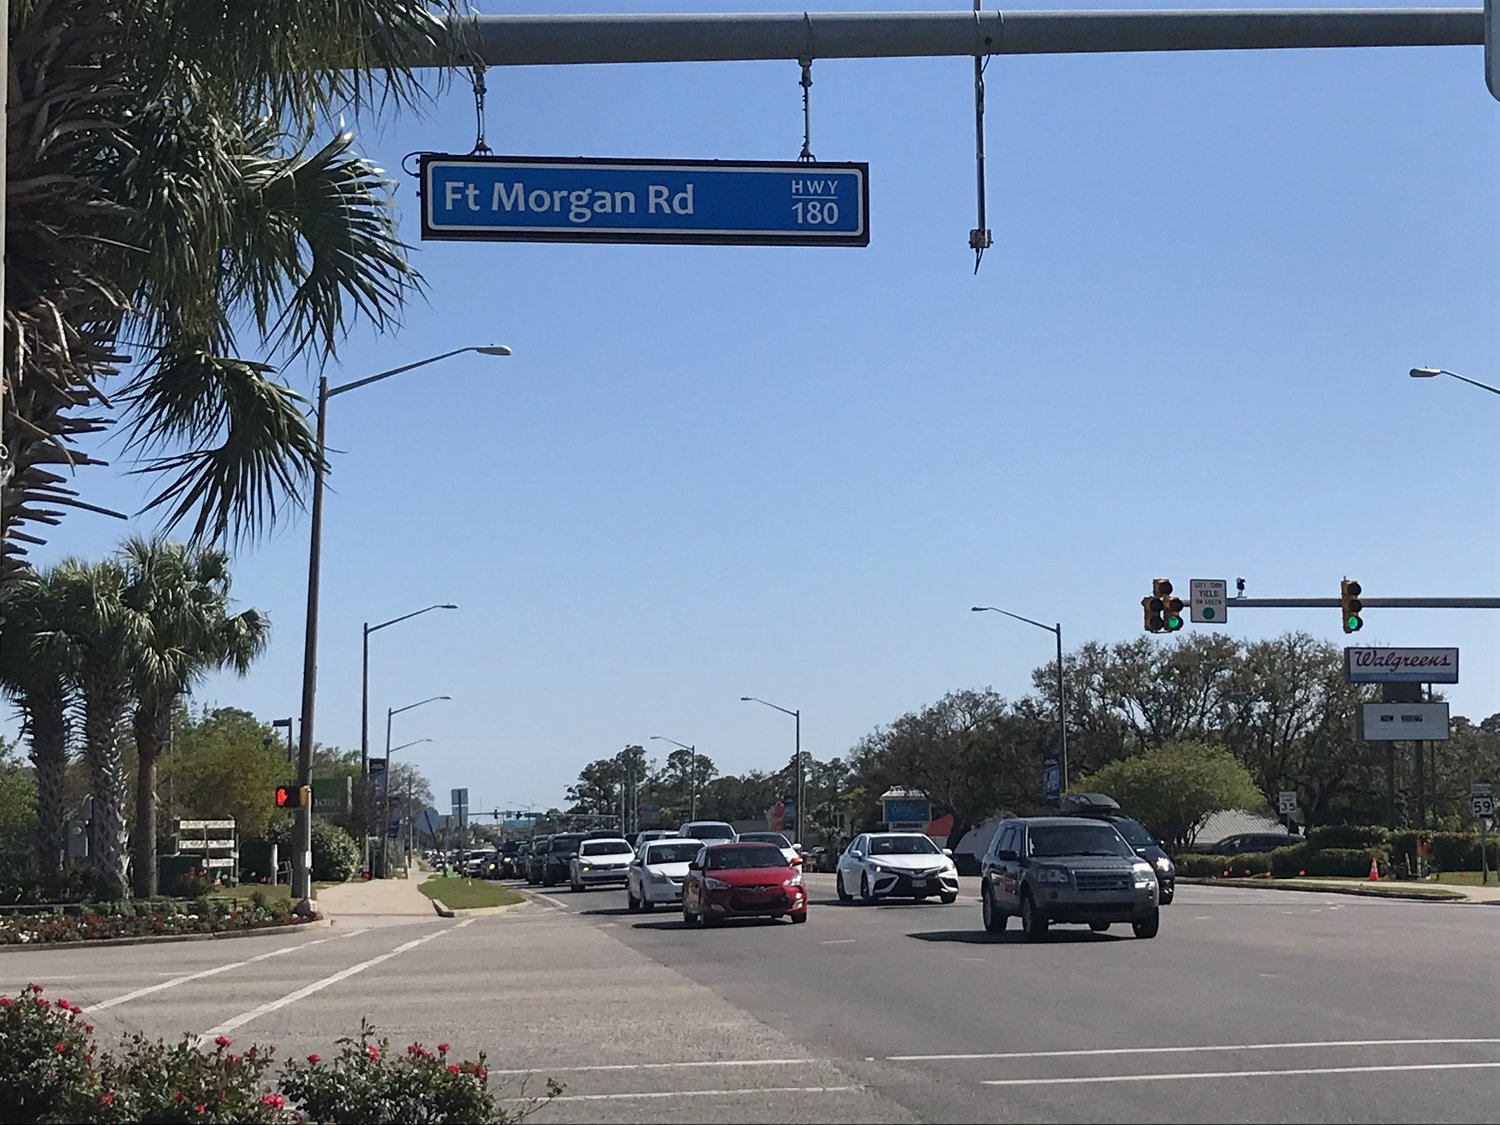 More blue street signs will be installed in Gulf Shores to replace markers destroyed by Hurricane Sally. Signs with updated street names will also be added.